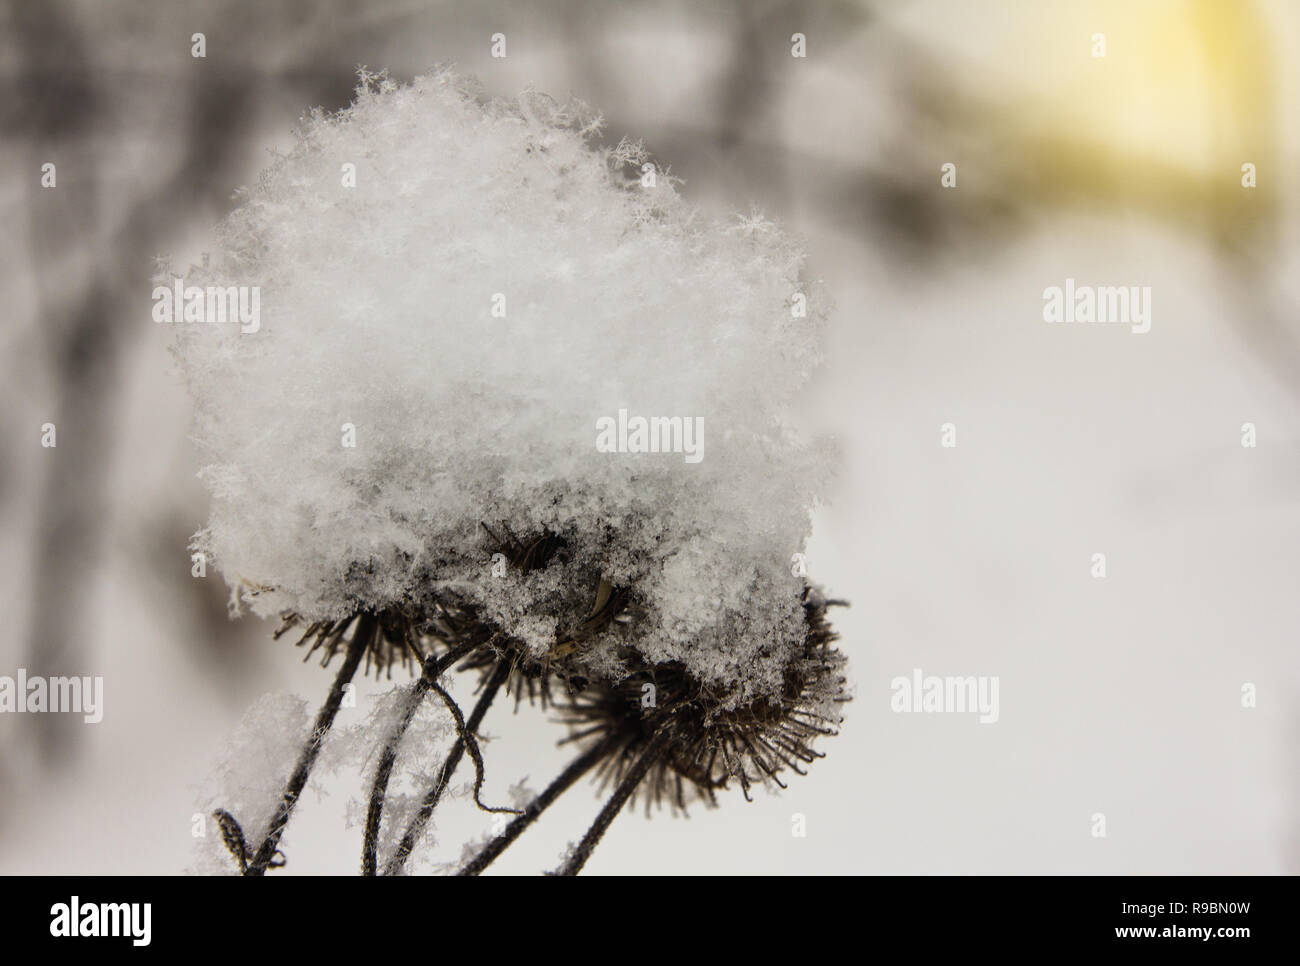 Snowflakes crystals of freshly falling fluffy snow on a dry thistle in a winter field. Stock Photo